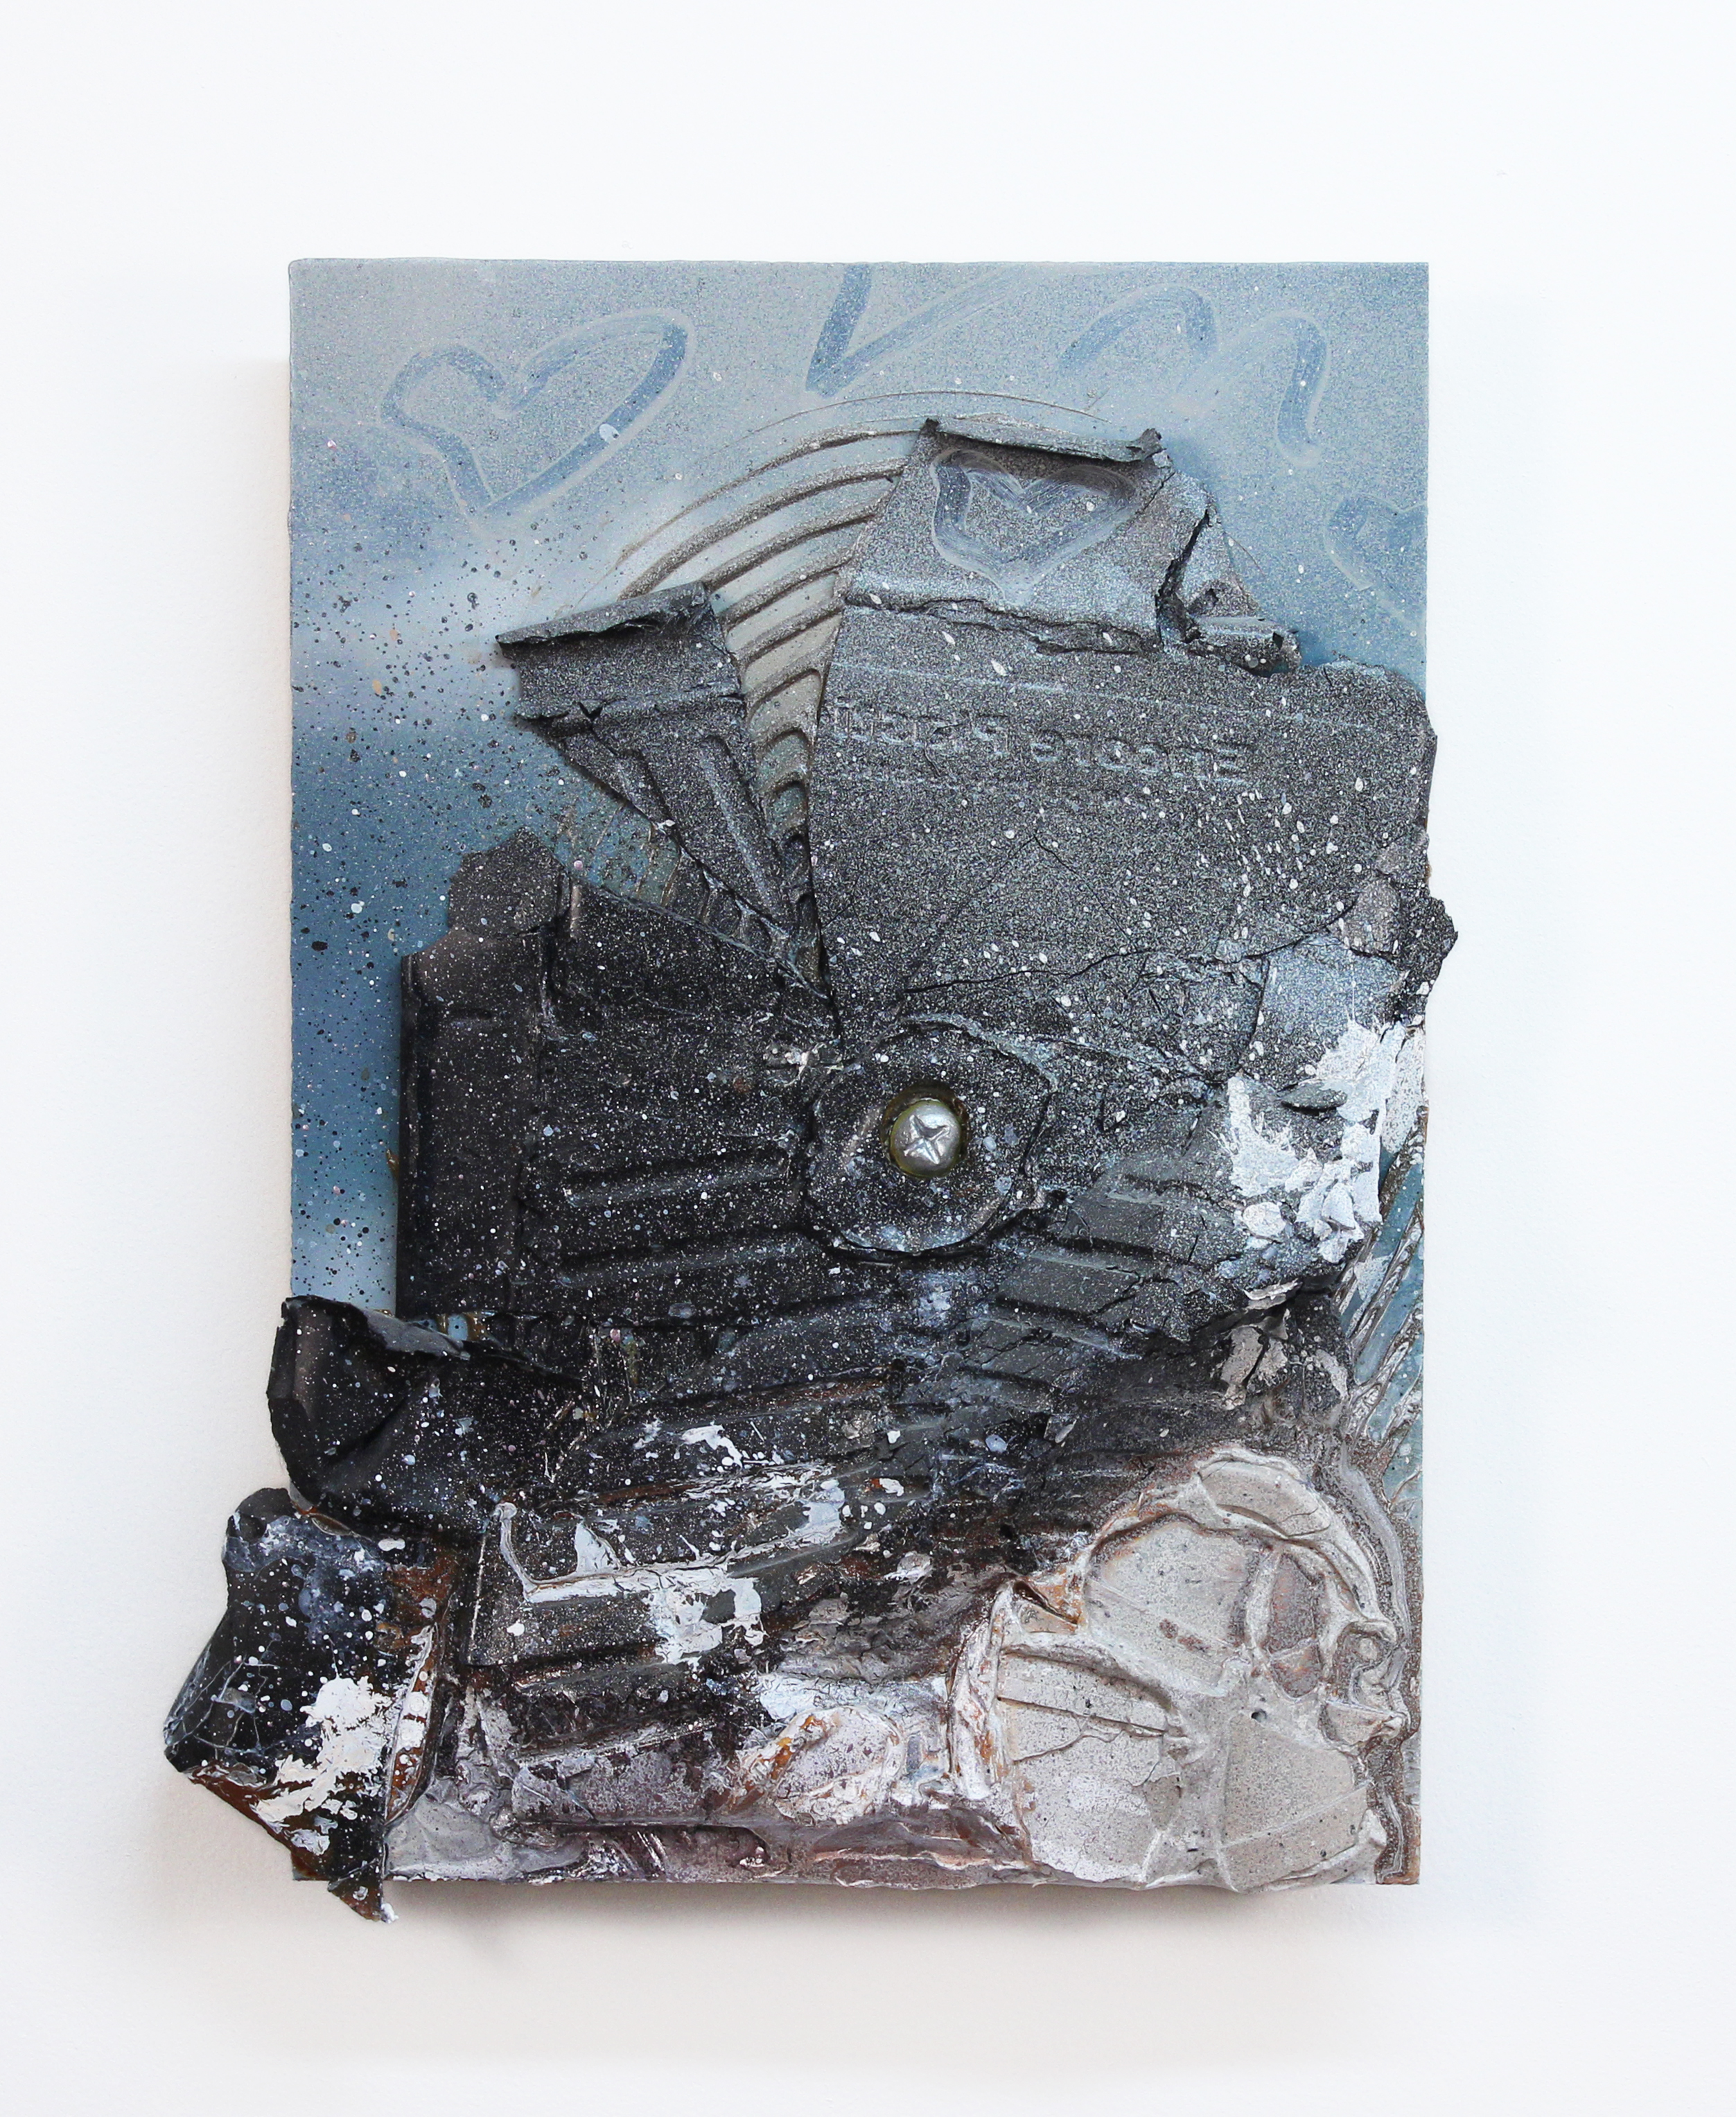 Willie_Smith-08_Dusty_Rusty_Ripped_Glued_Scattered_and_Screwed__2015_Acrylic_and_airbrushed_acrylic_on_wood_panel_and_aqua_resin_air_dried_clay_fiberglass_white_glue